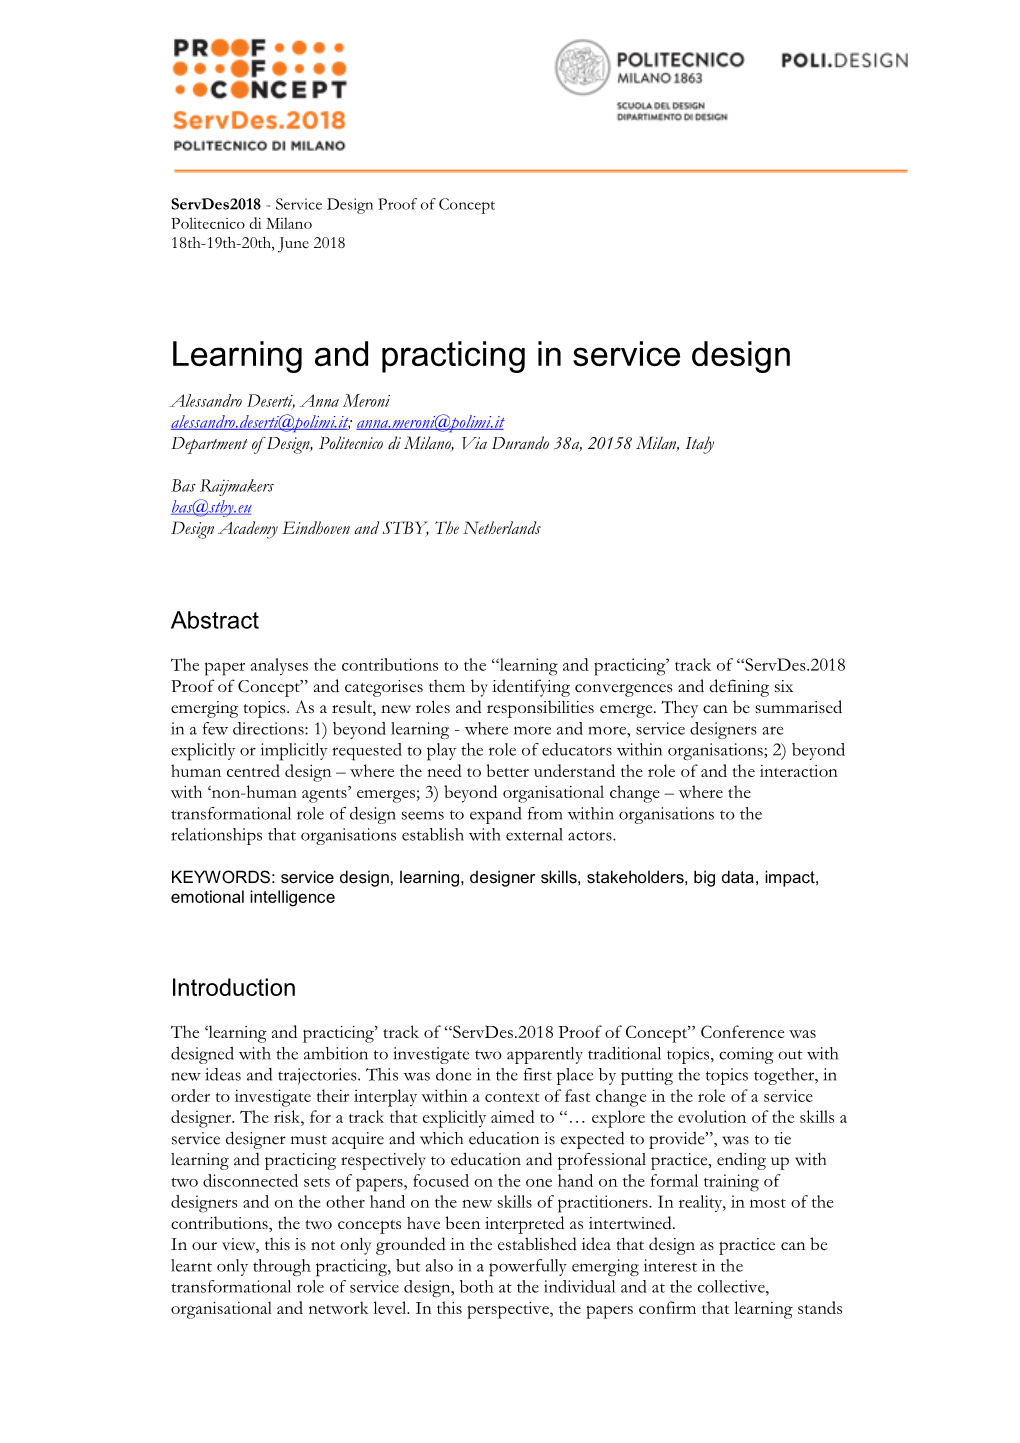 Learning and Practicing in Service Design